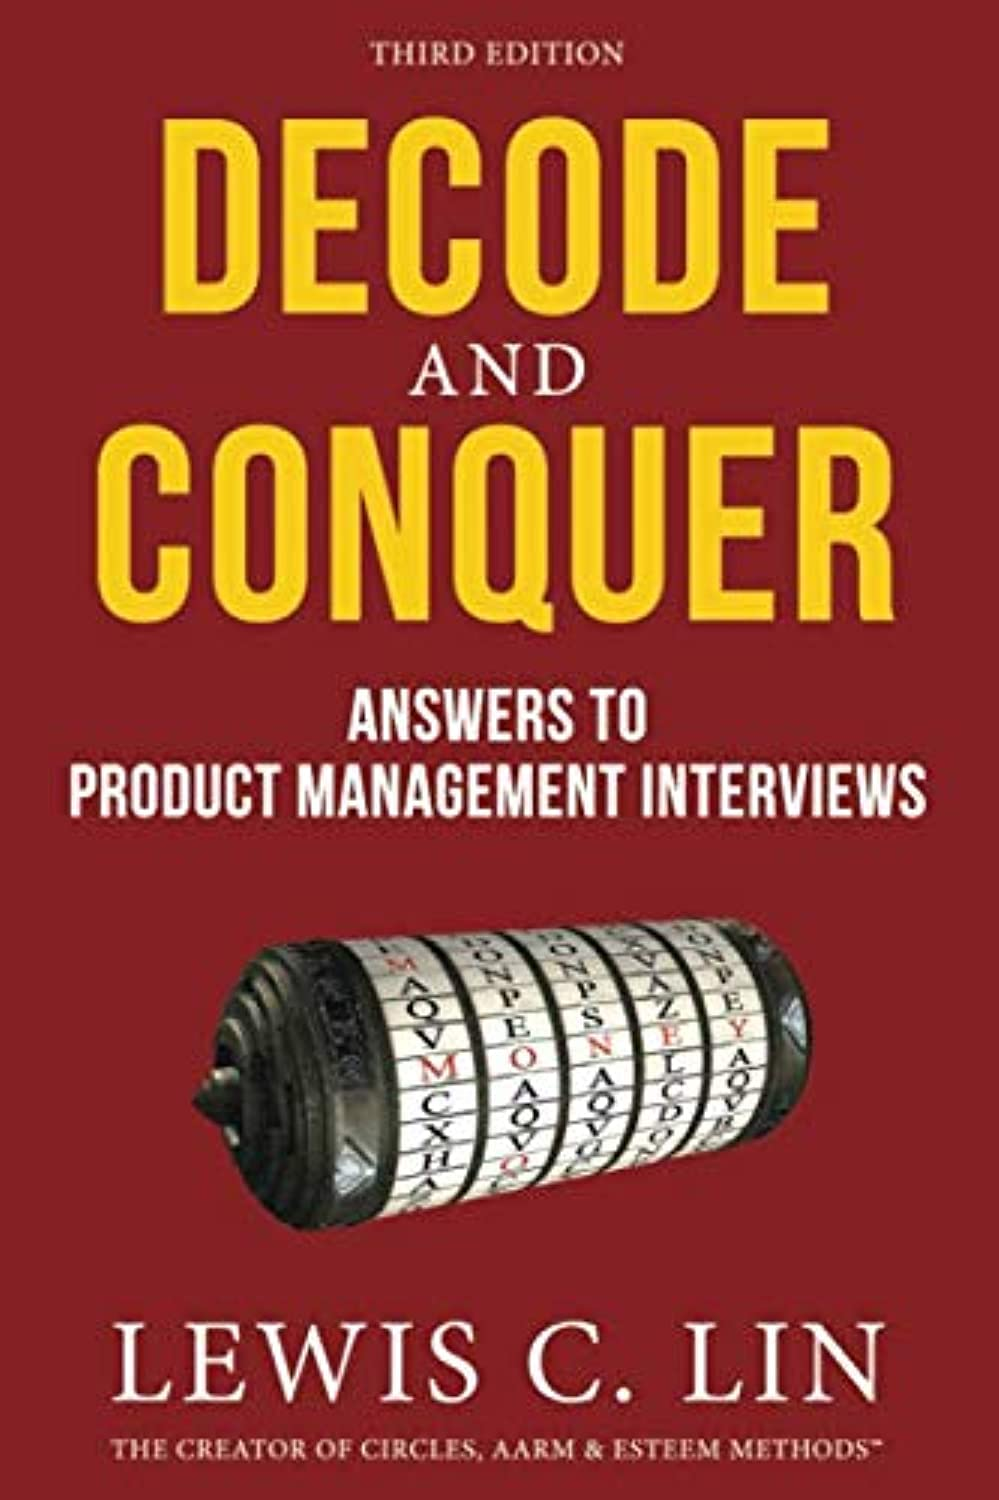  Decode and Conquer - best product management books